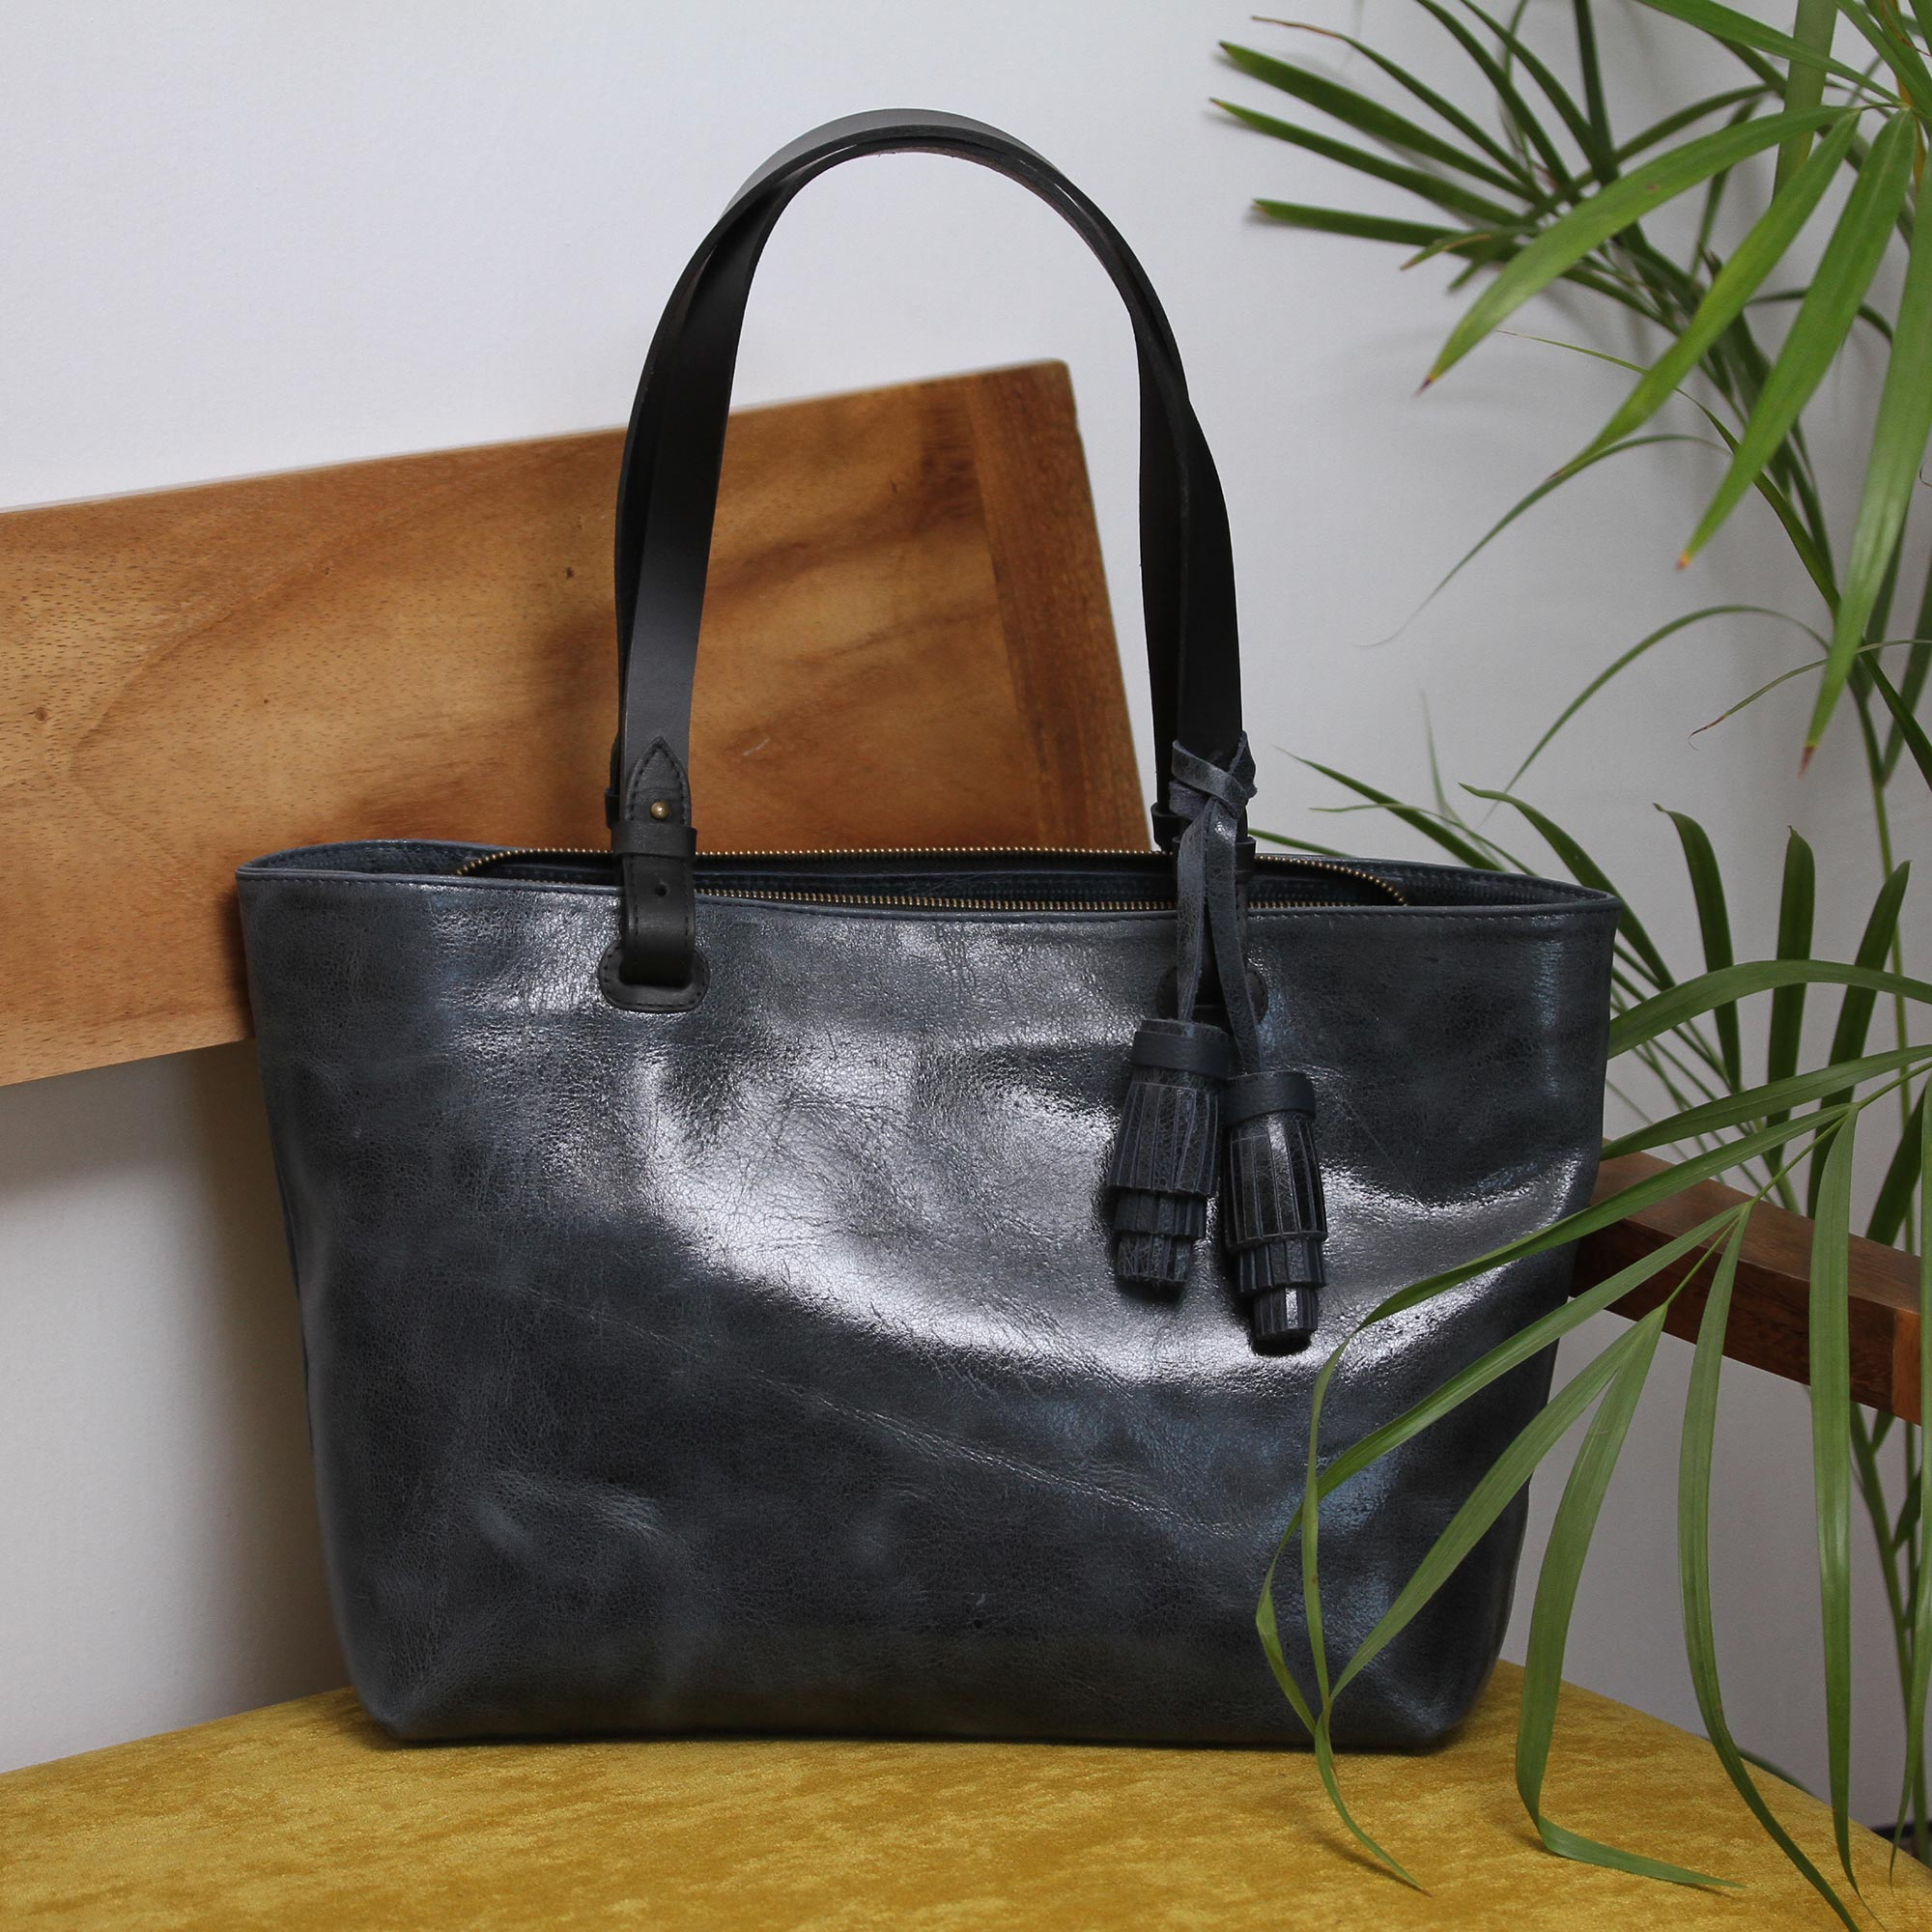 Handcrafted Leather Shoulder Bag in Black from Mexico - Beautiful ...